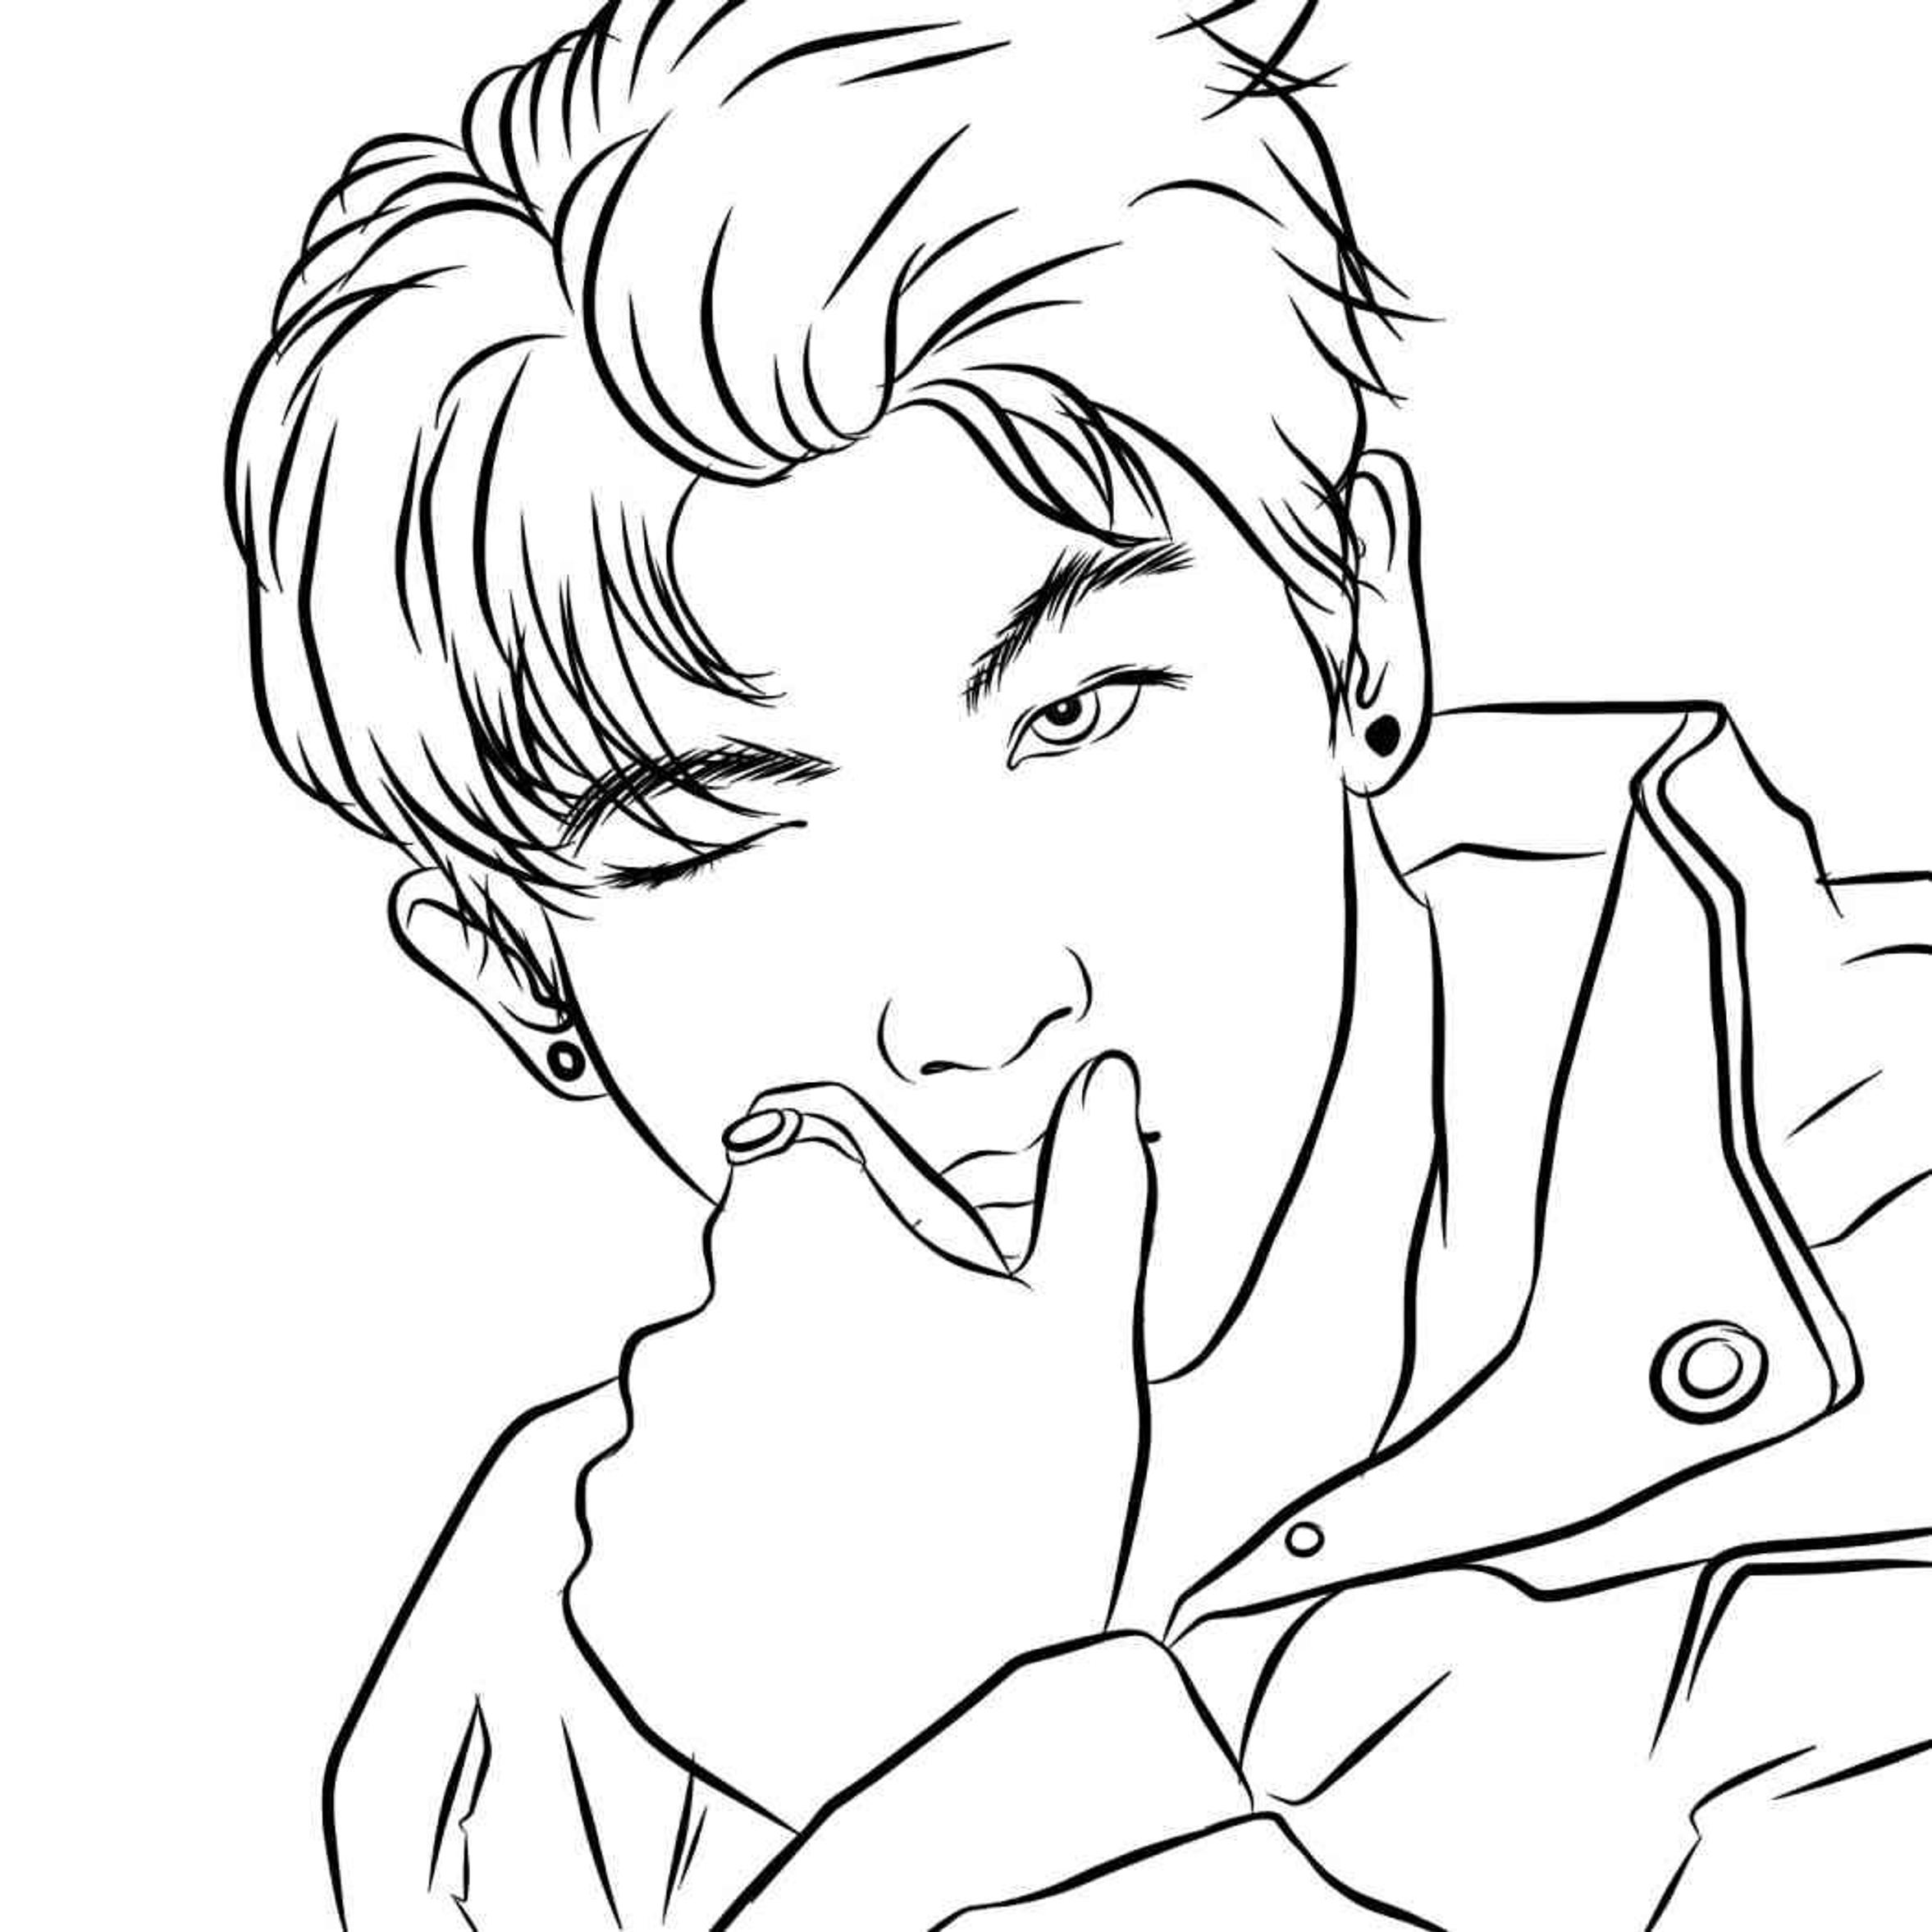 BTS coloring pages with big had and not so big pictures